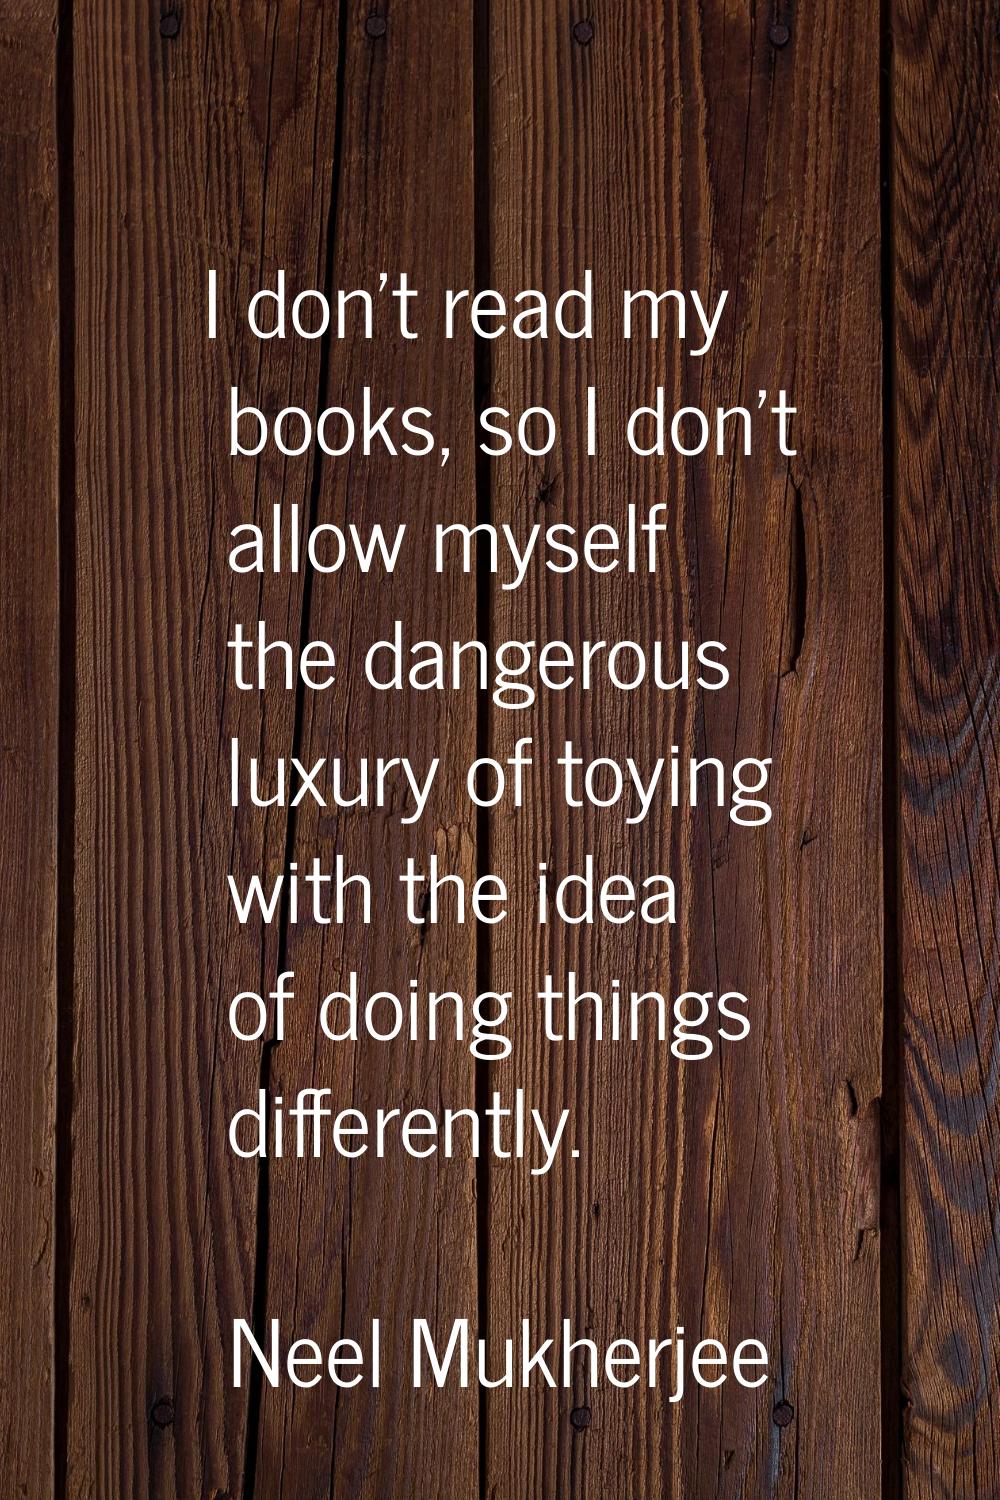 I don't read my books, so I don't allow myself the dangerous luxury of toying with the idea of doin